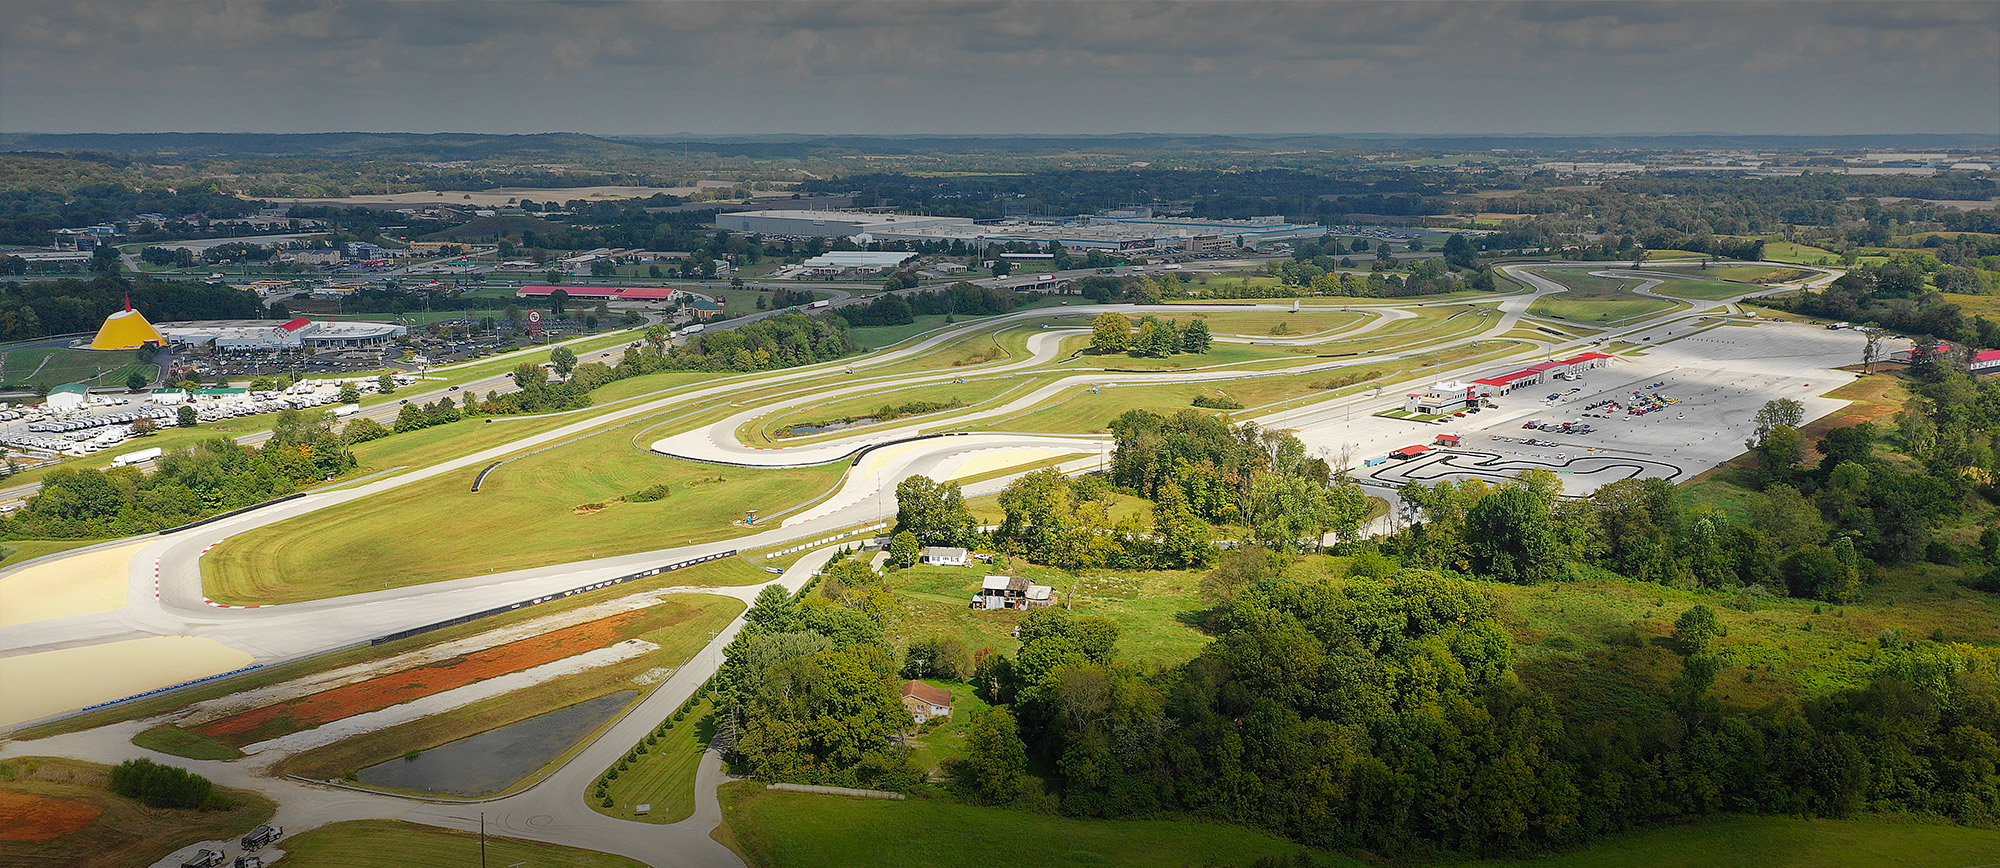 The NCM Motorsports Park and The Driving Club at Road Atlanta Announce New Reciprocal Membership Agreement